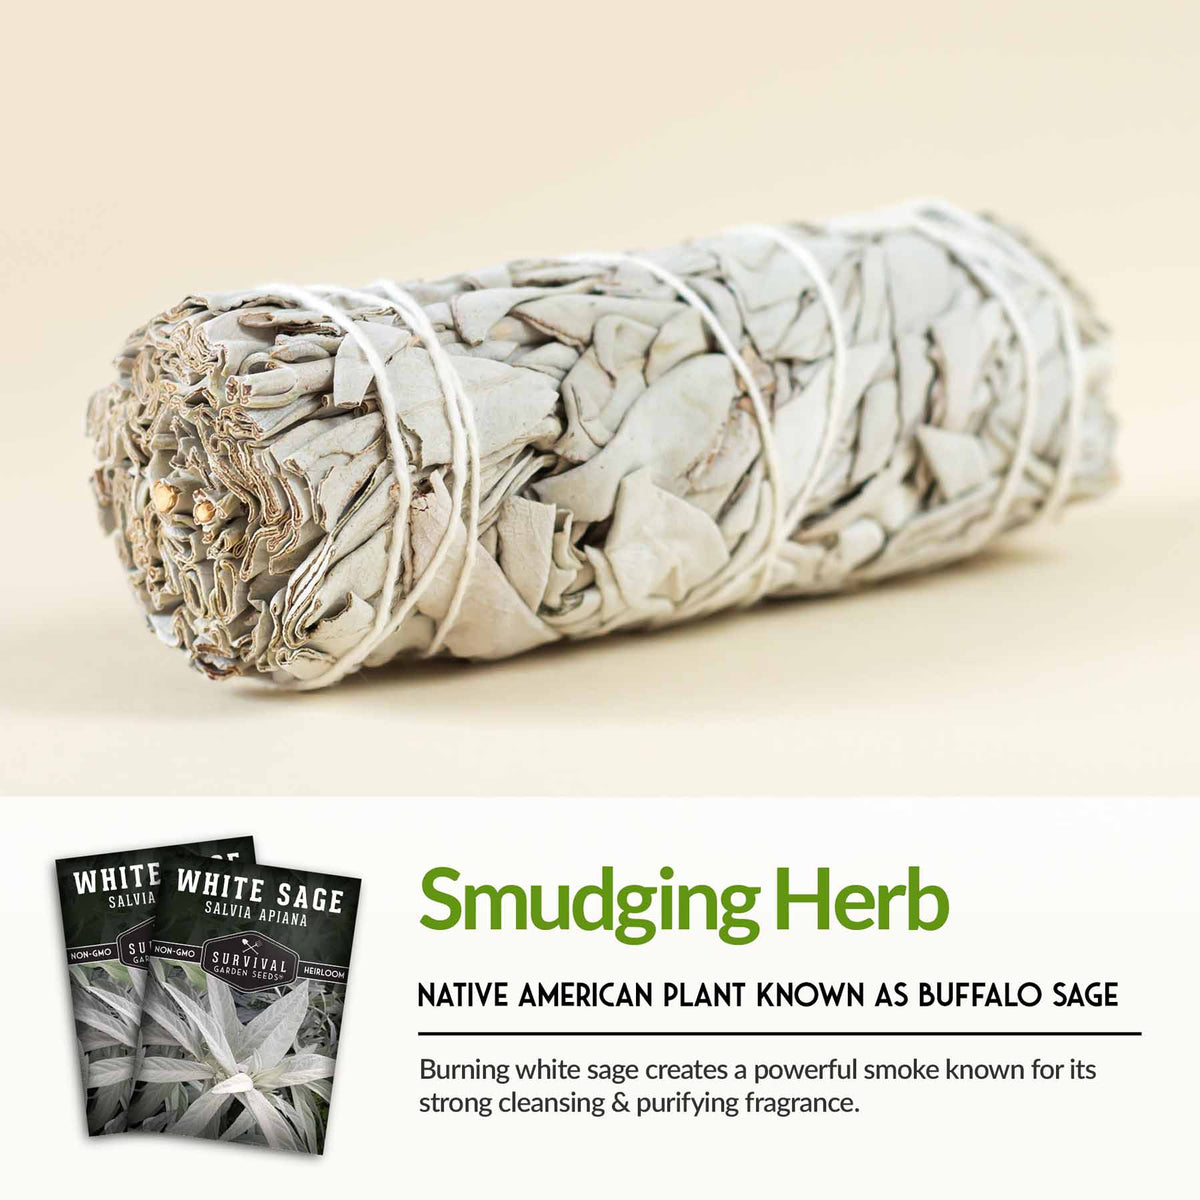 White Sage is a smudging herb